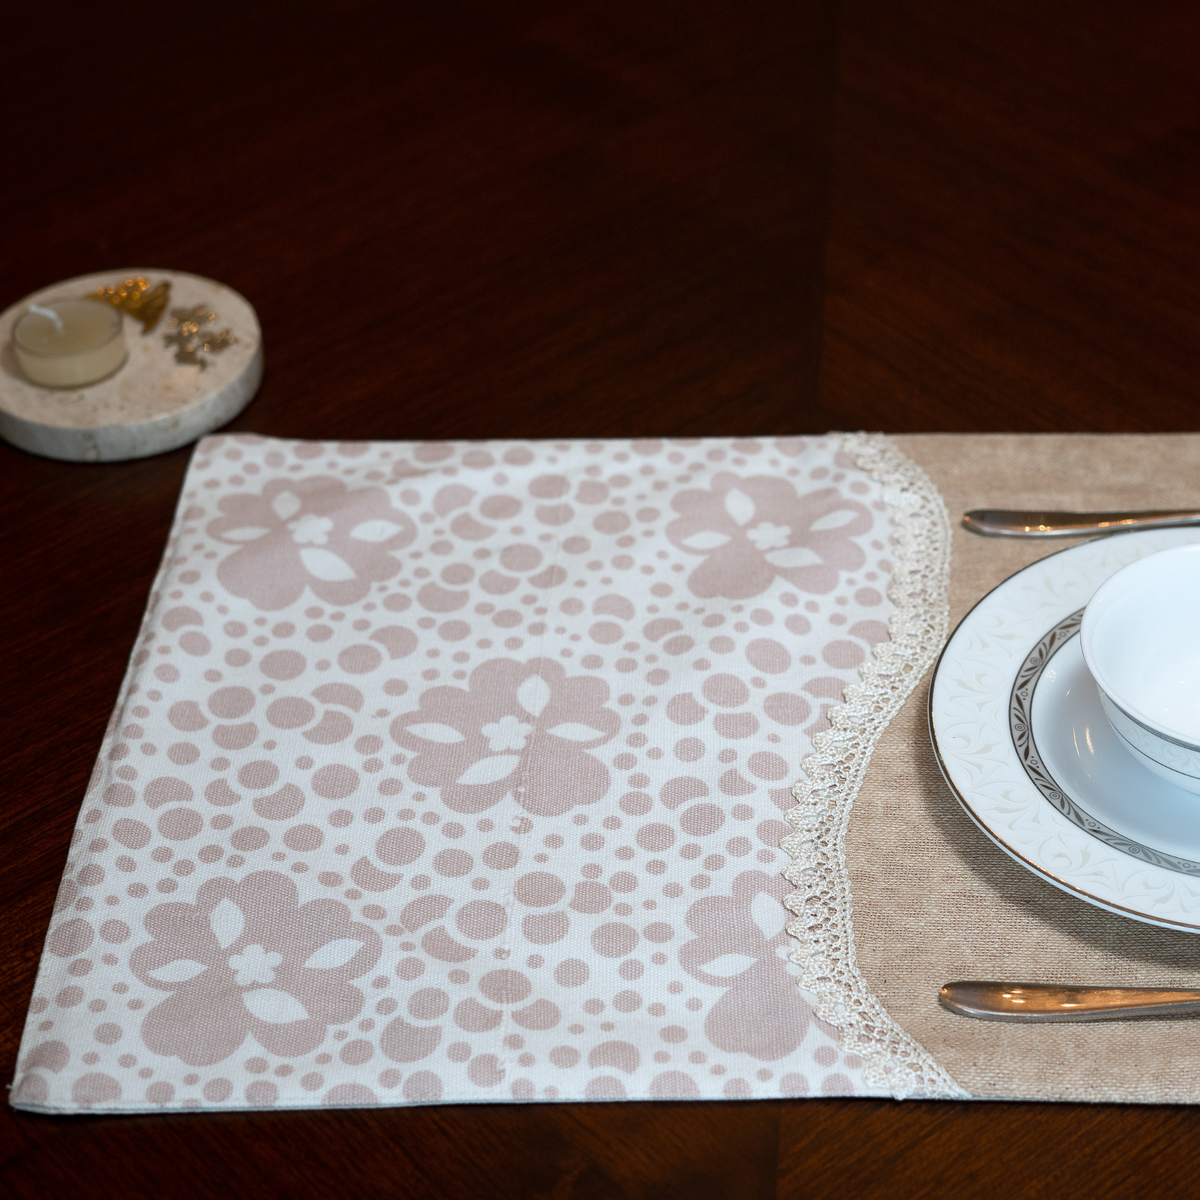 The Luxelife Cappuccino Placemats